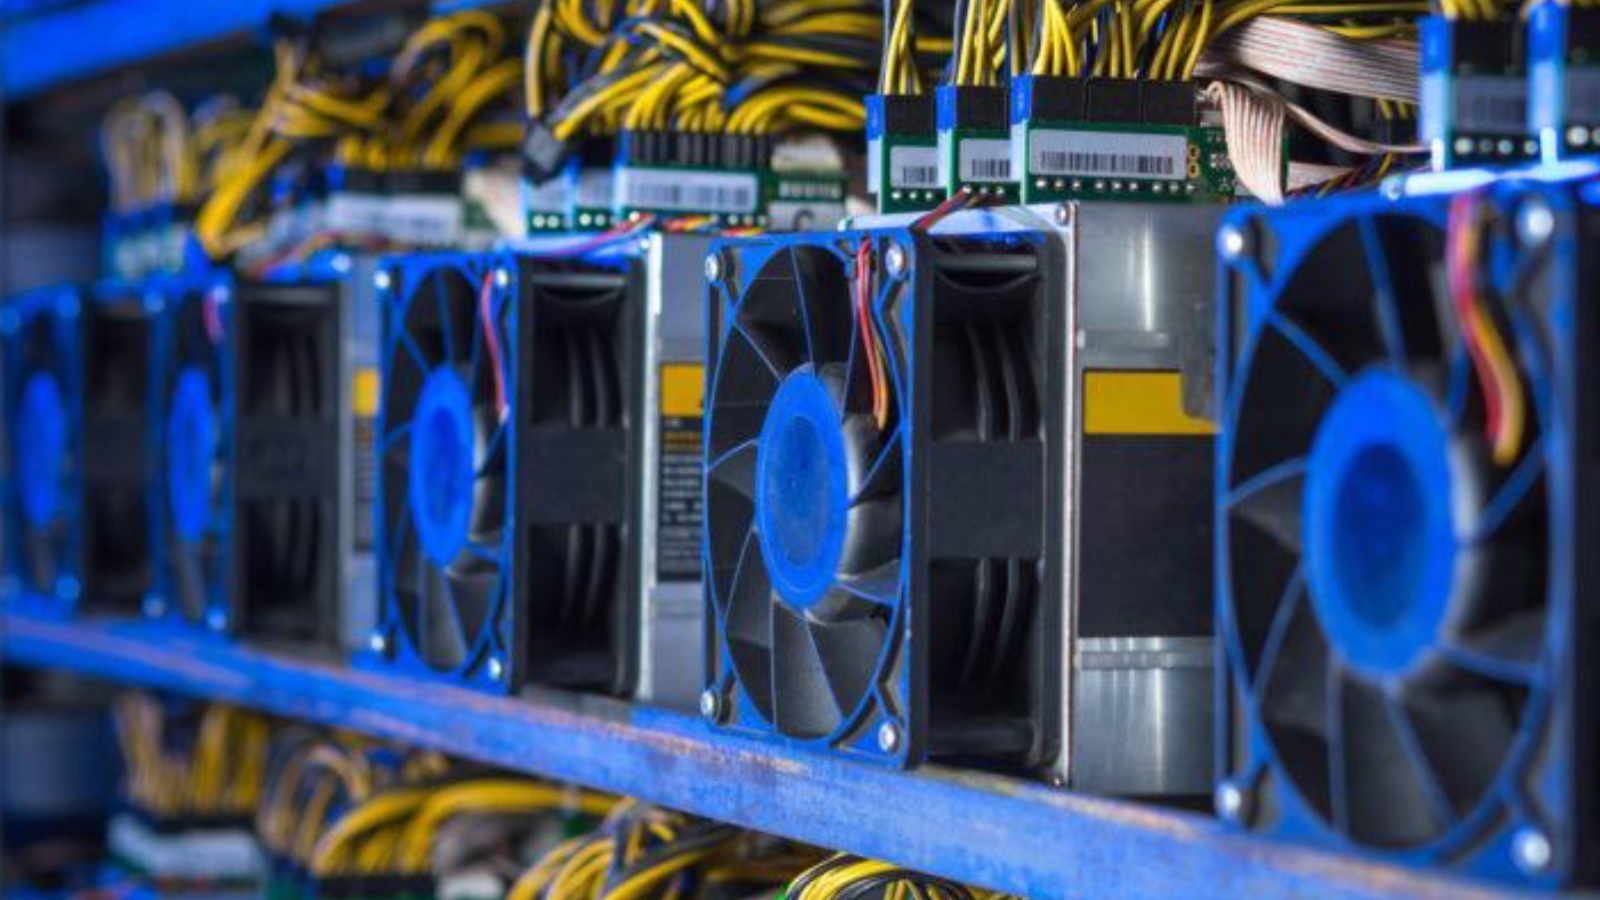 Bitcoin Miner Core Scientific Strikes $100M Stock Deal After Dumping BTC